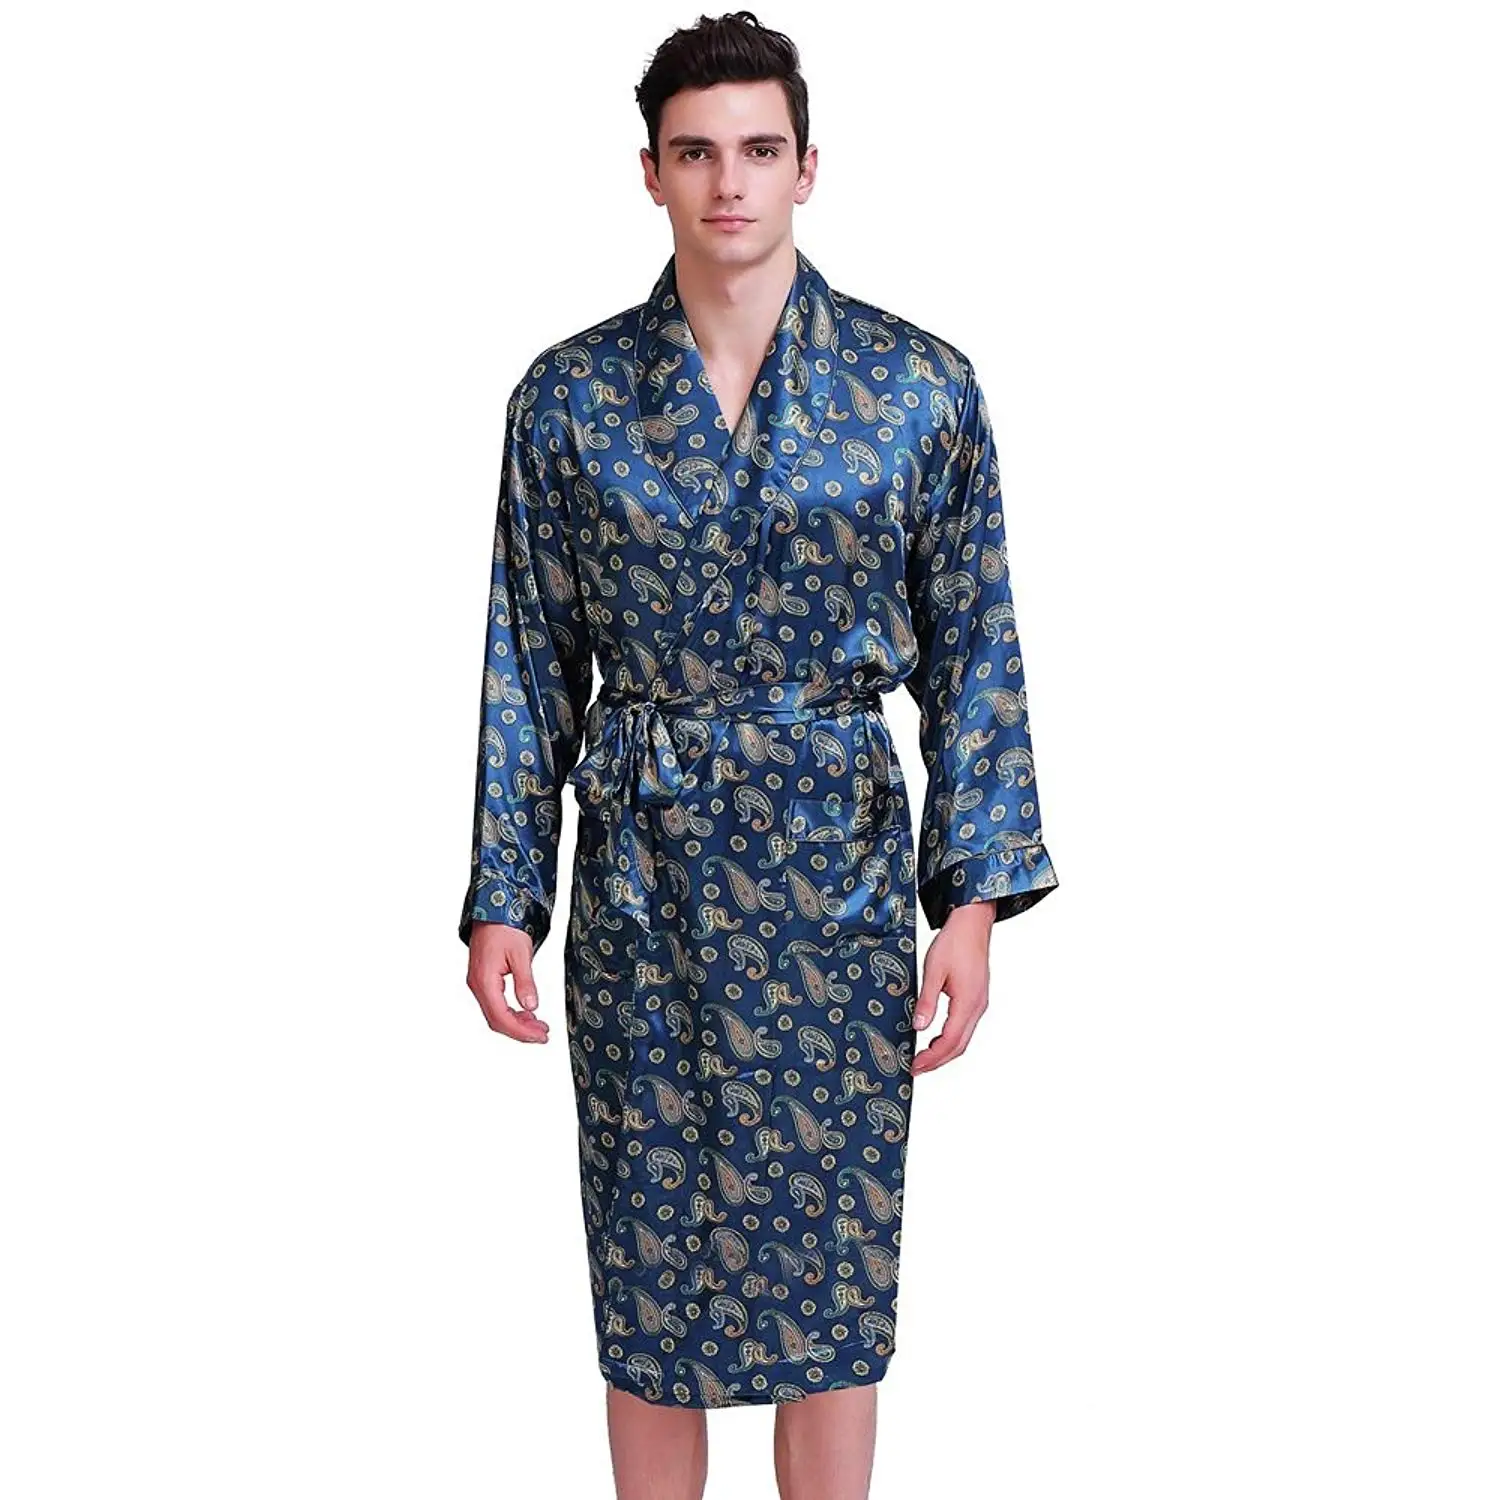 Cheap Mens Nightgown, find Mens Nightgown deals on line at Alibaba.com